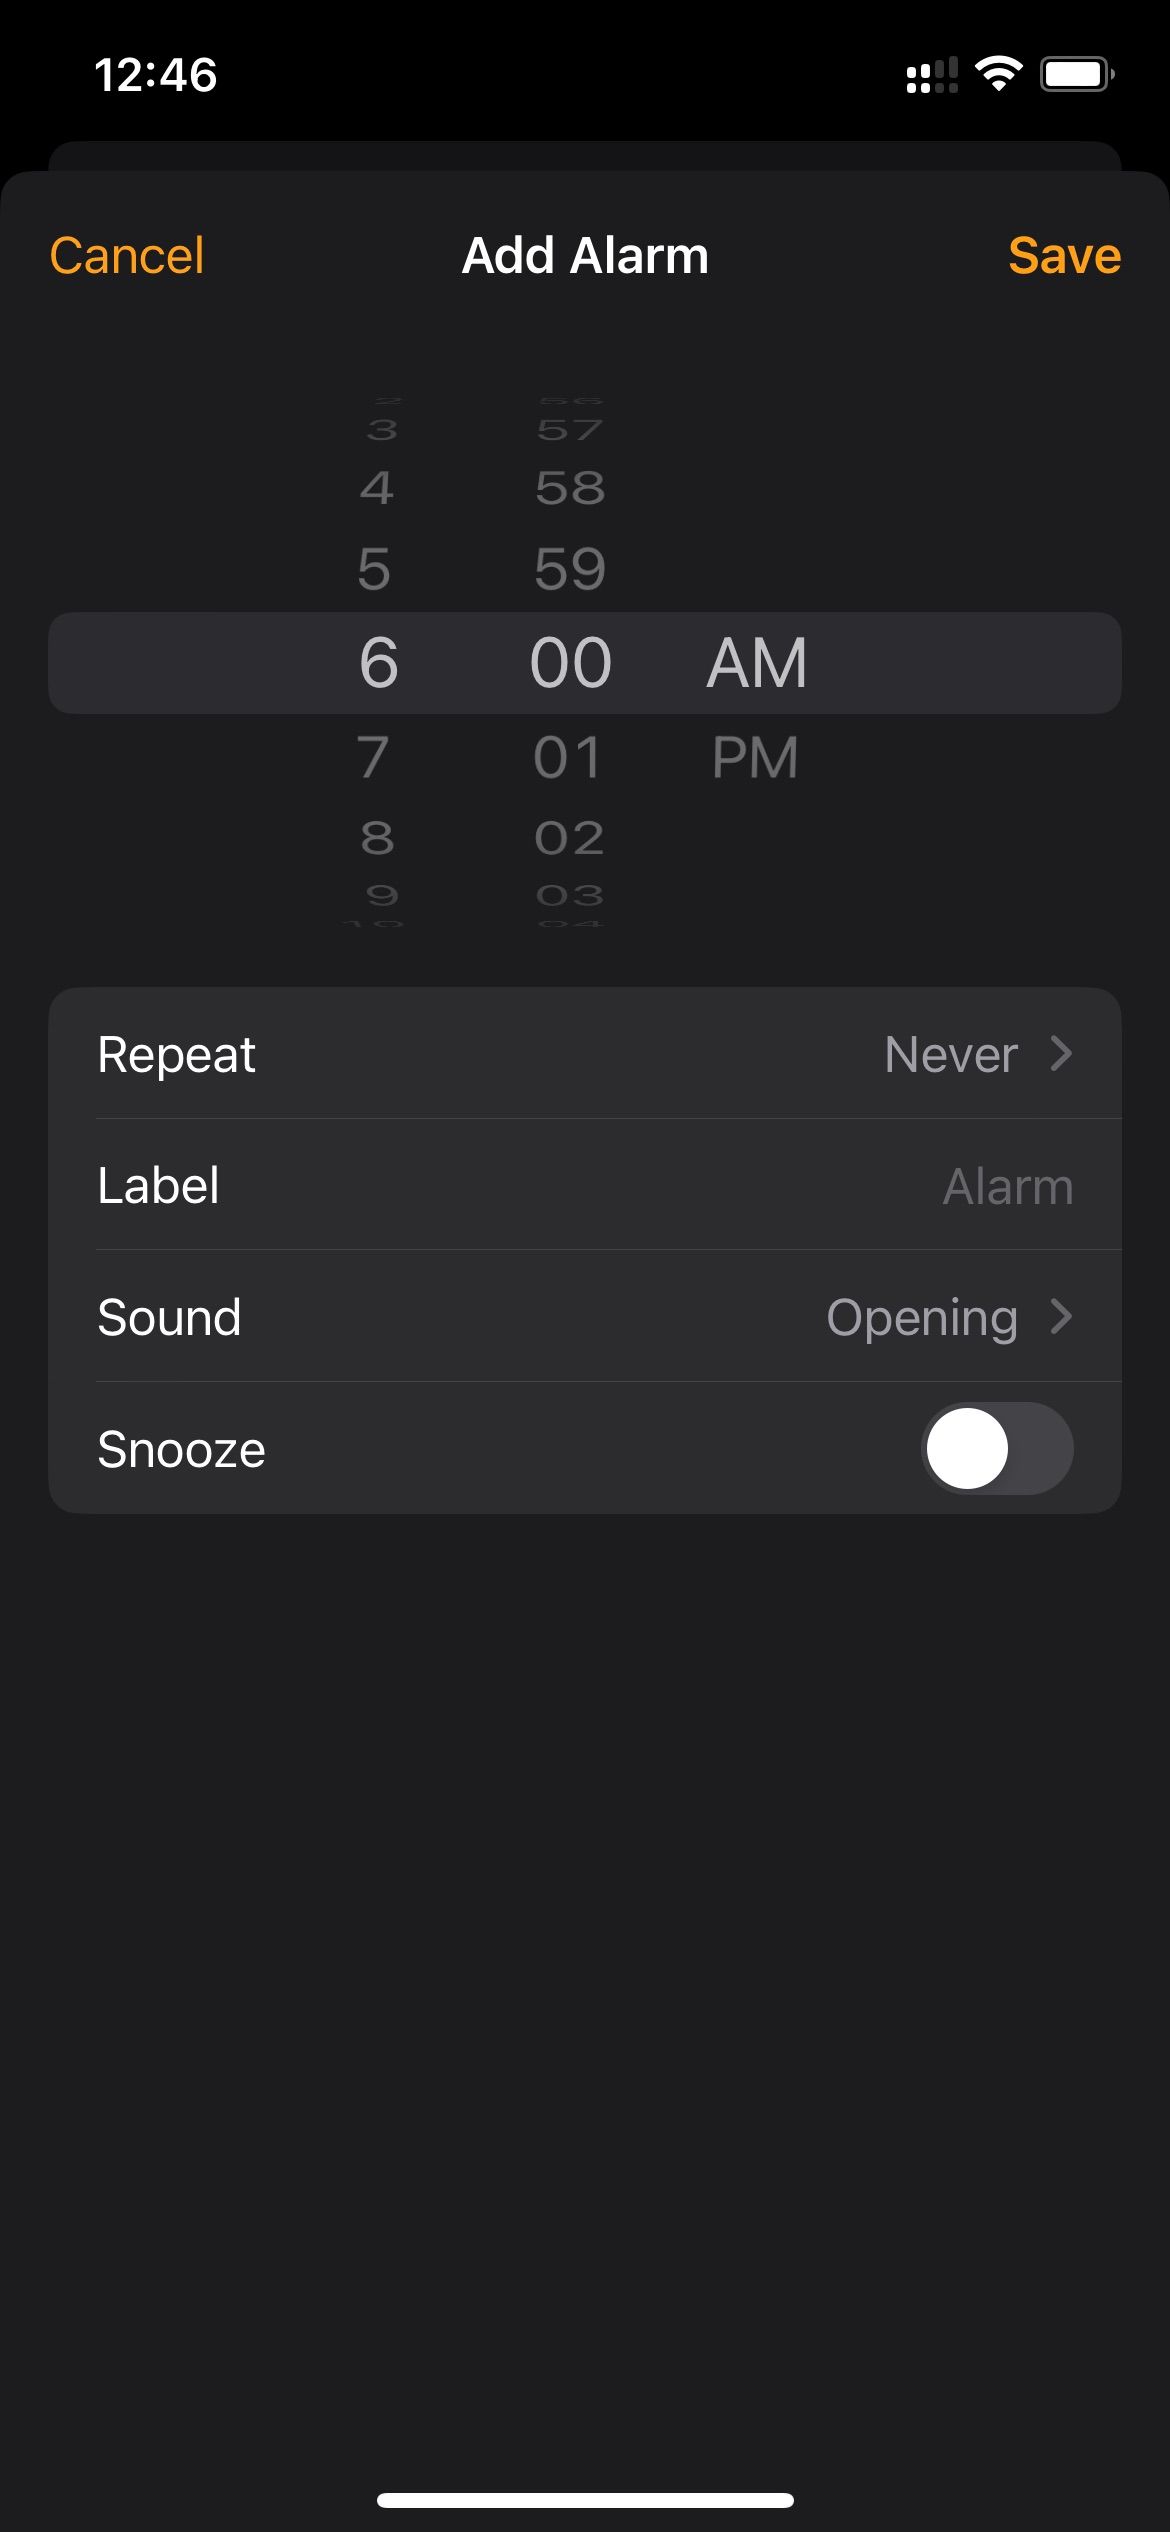 Set a new alarm and disable Snooze